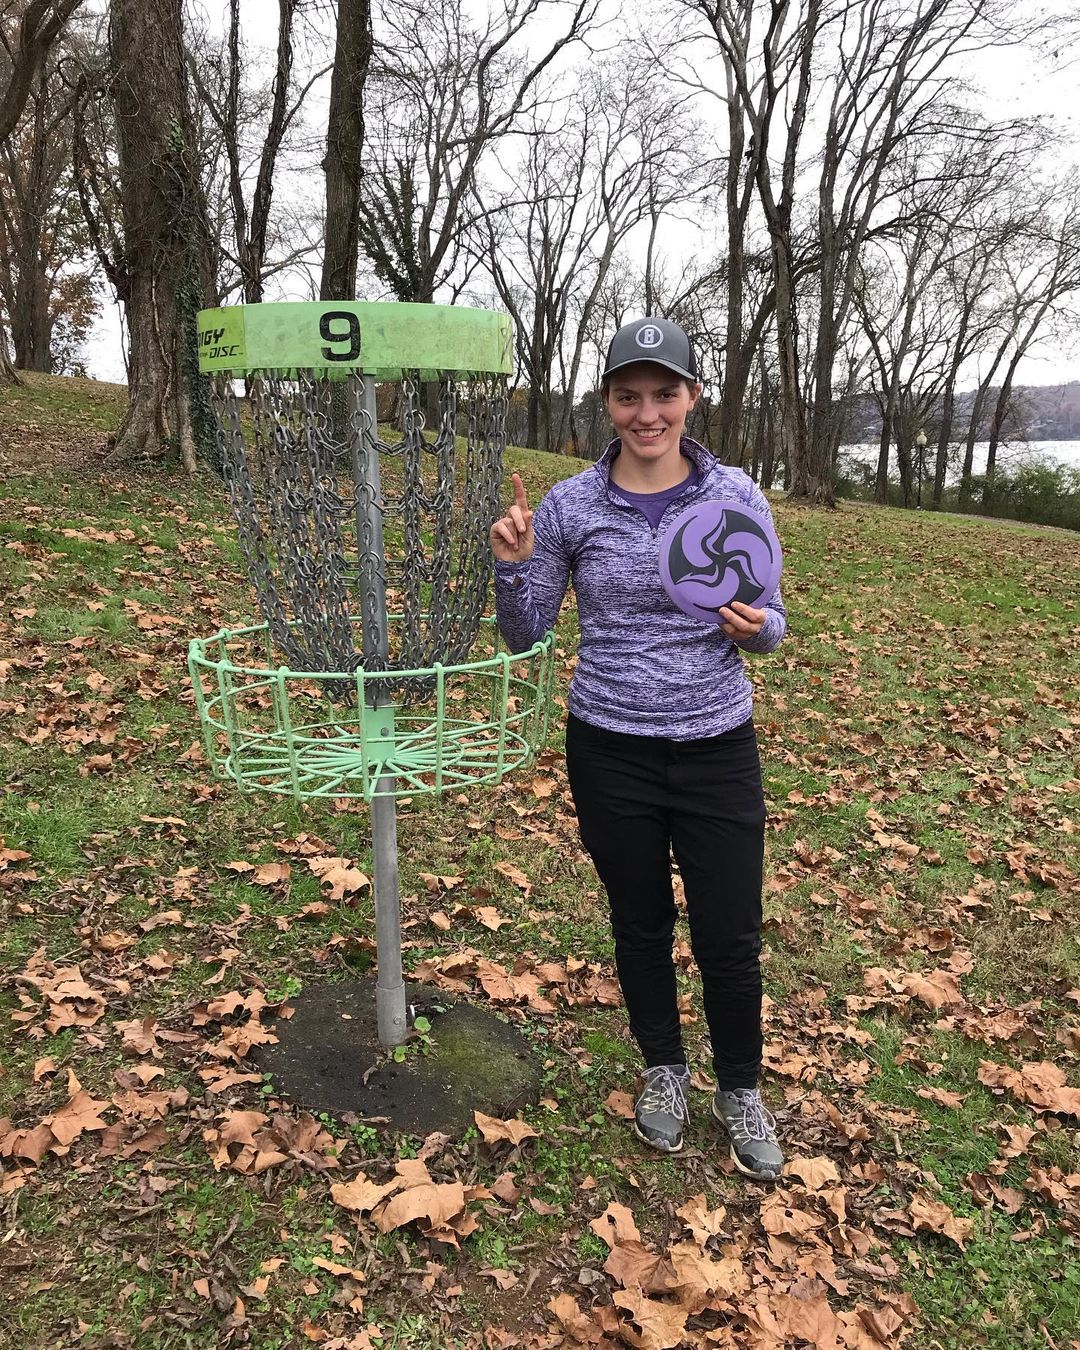 19-year-old professional disc golfer Heather Young